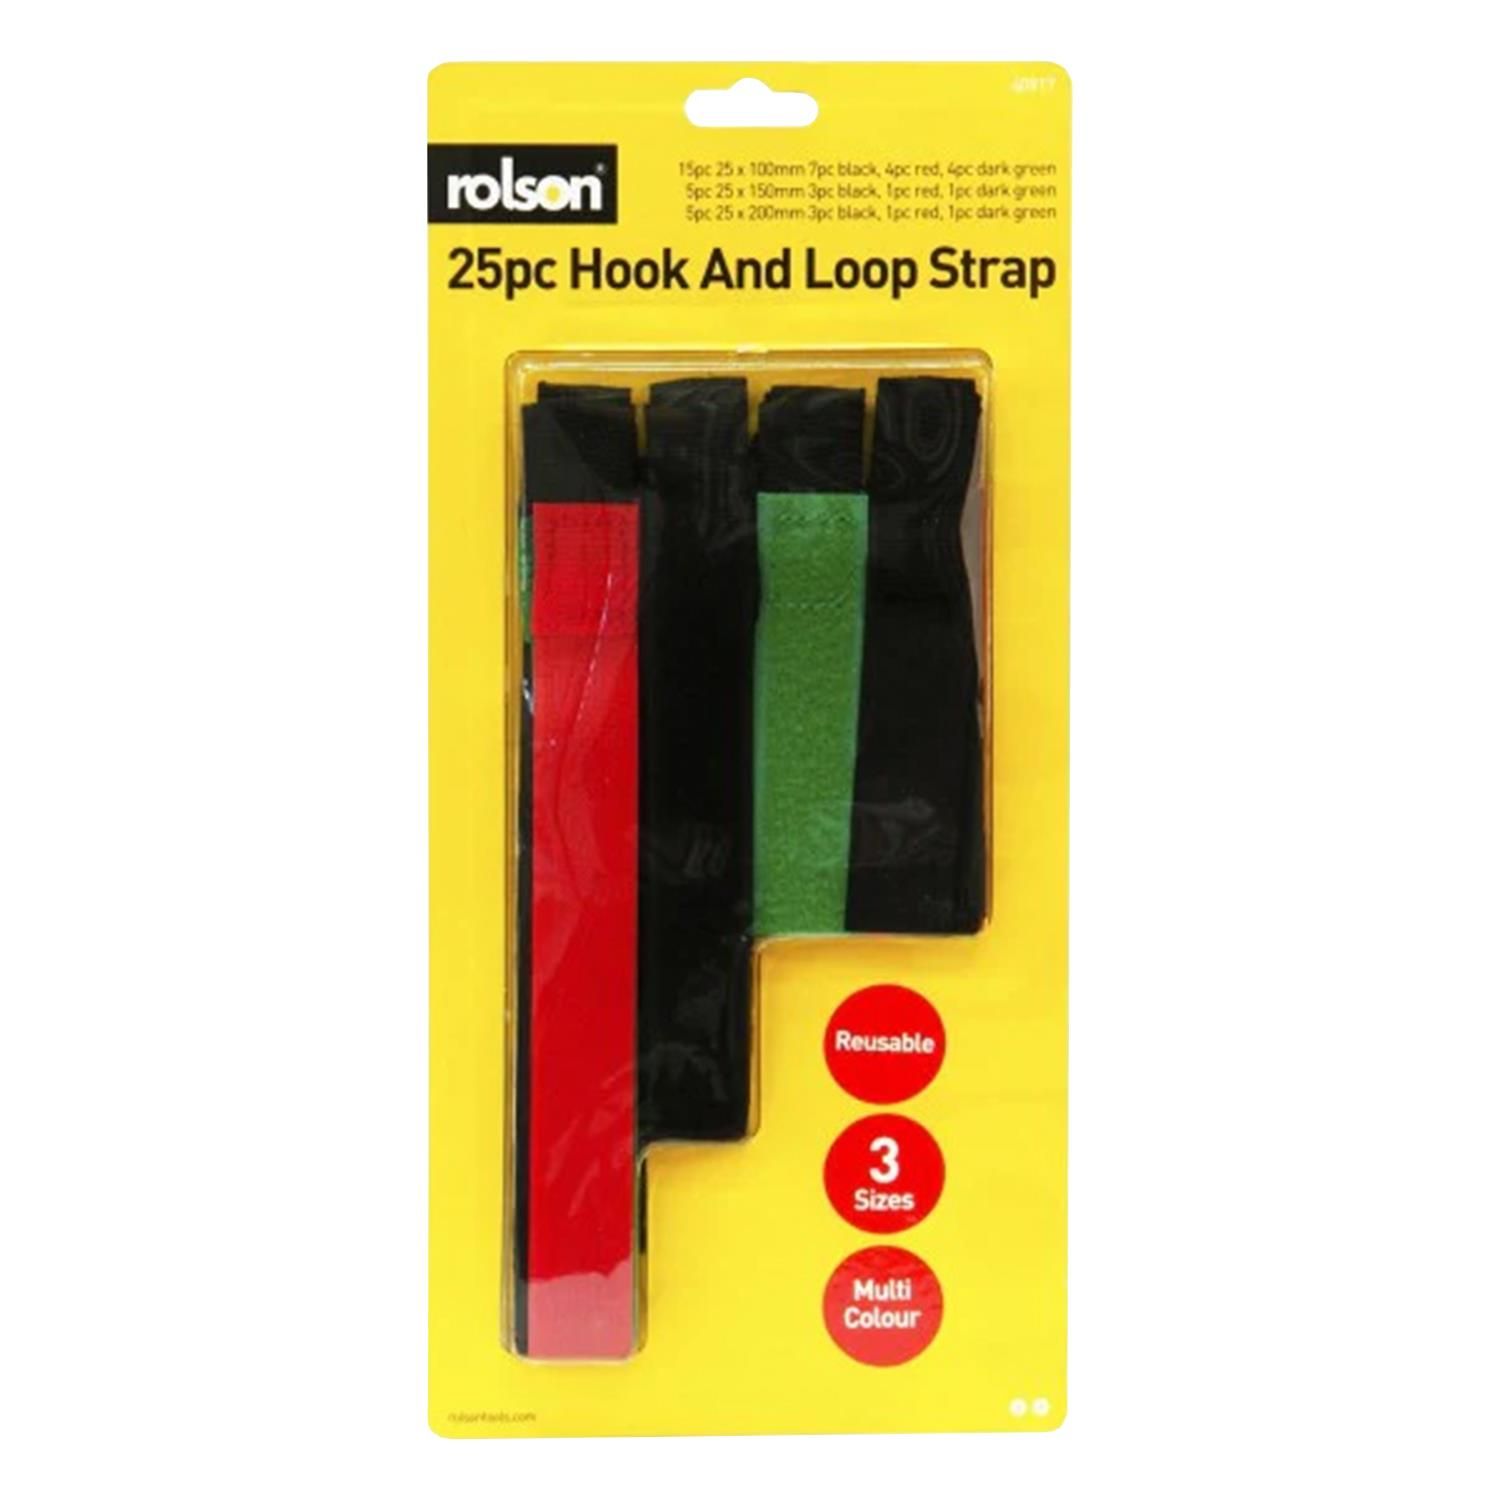 These straps feature various lengths and colors to get cable chaos under control.

Product Description :
Good for securing sports equipment while traveling, or wiring cages in your vegetable garden
Hook and loop securing straps are multipurpose and adjustable

Pack Includes :
2,5m x 10cm straps: seven black, four red, and four dark green
2,5cm x 15cm straps: three black, one red, and one dark green
2,5cm x 20cm straps: three black, one red, and one dark green